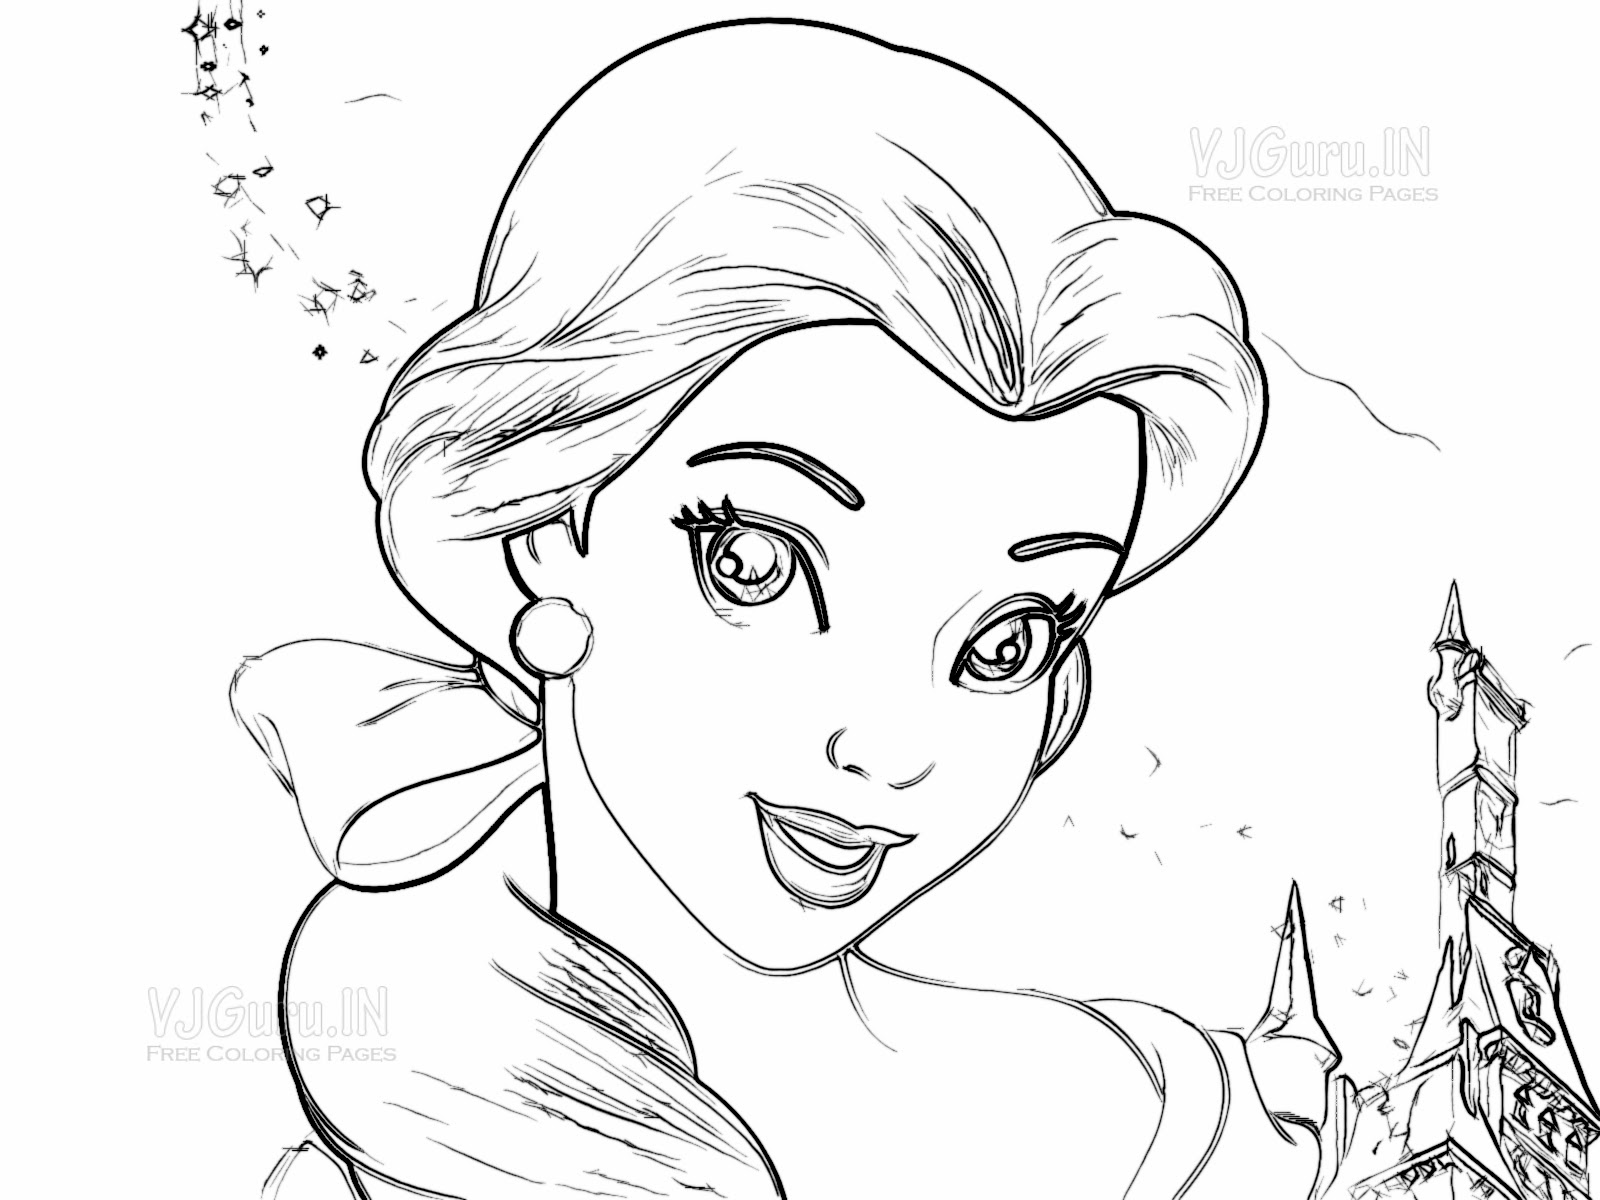  Cartoon Girl Coloring Pages 1